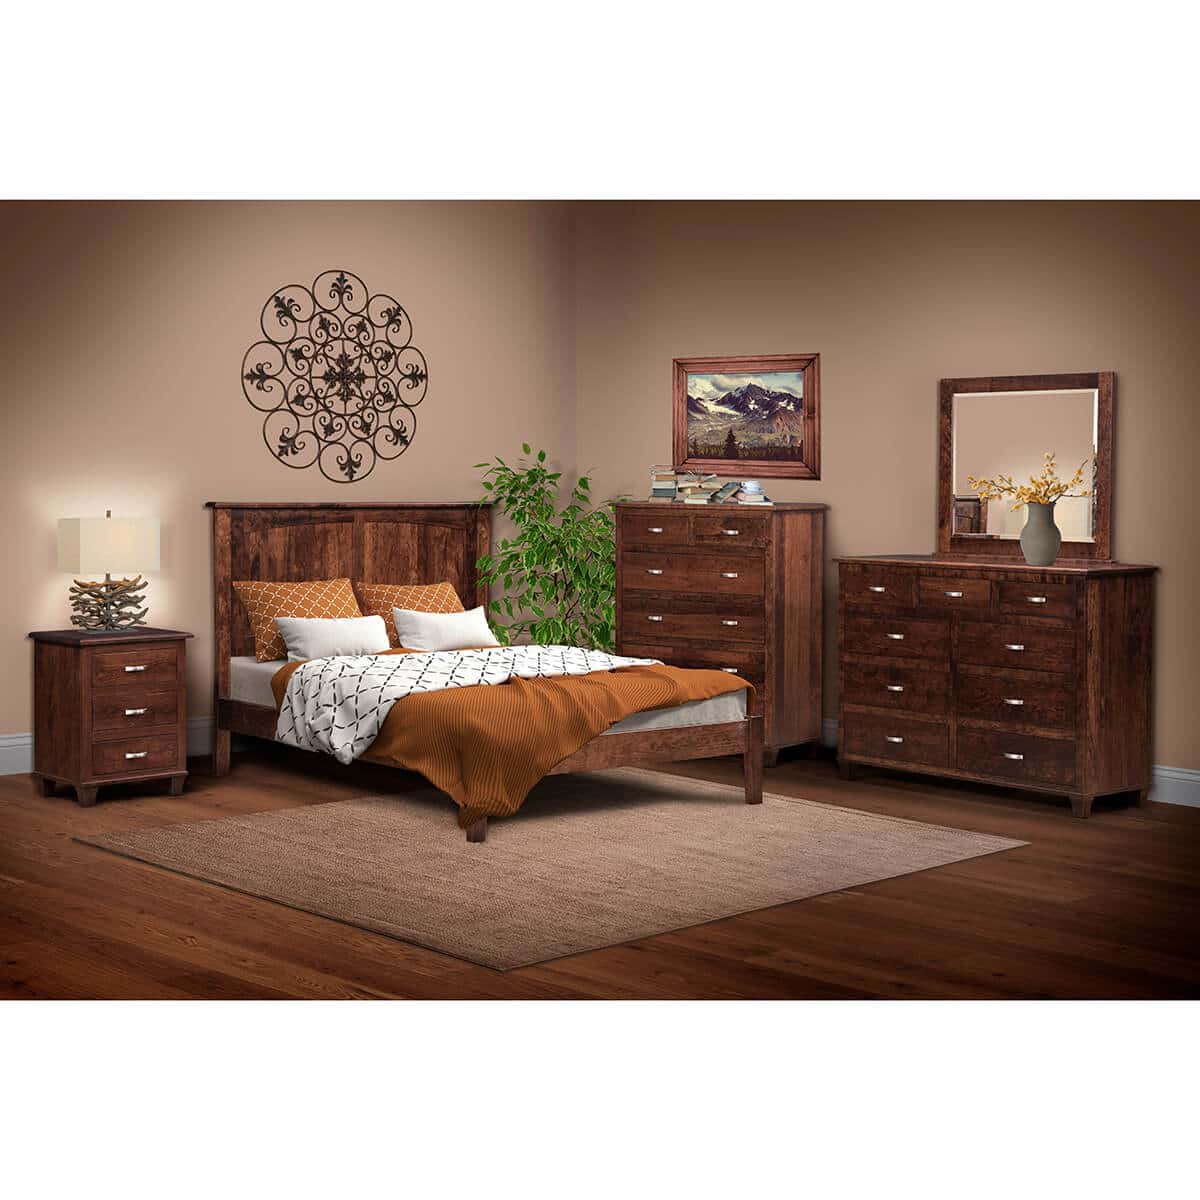 Bedroom Furniture American Made Amish Country Heirlooms